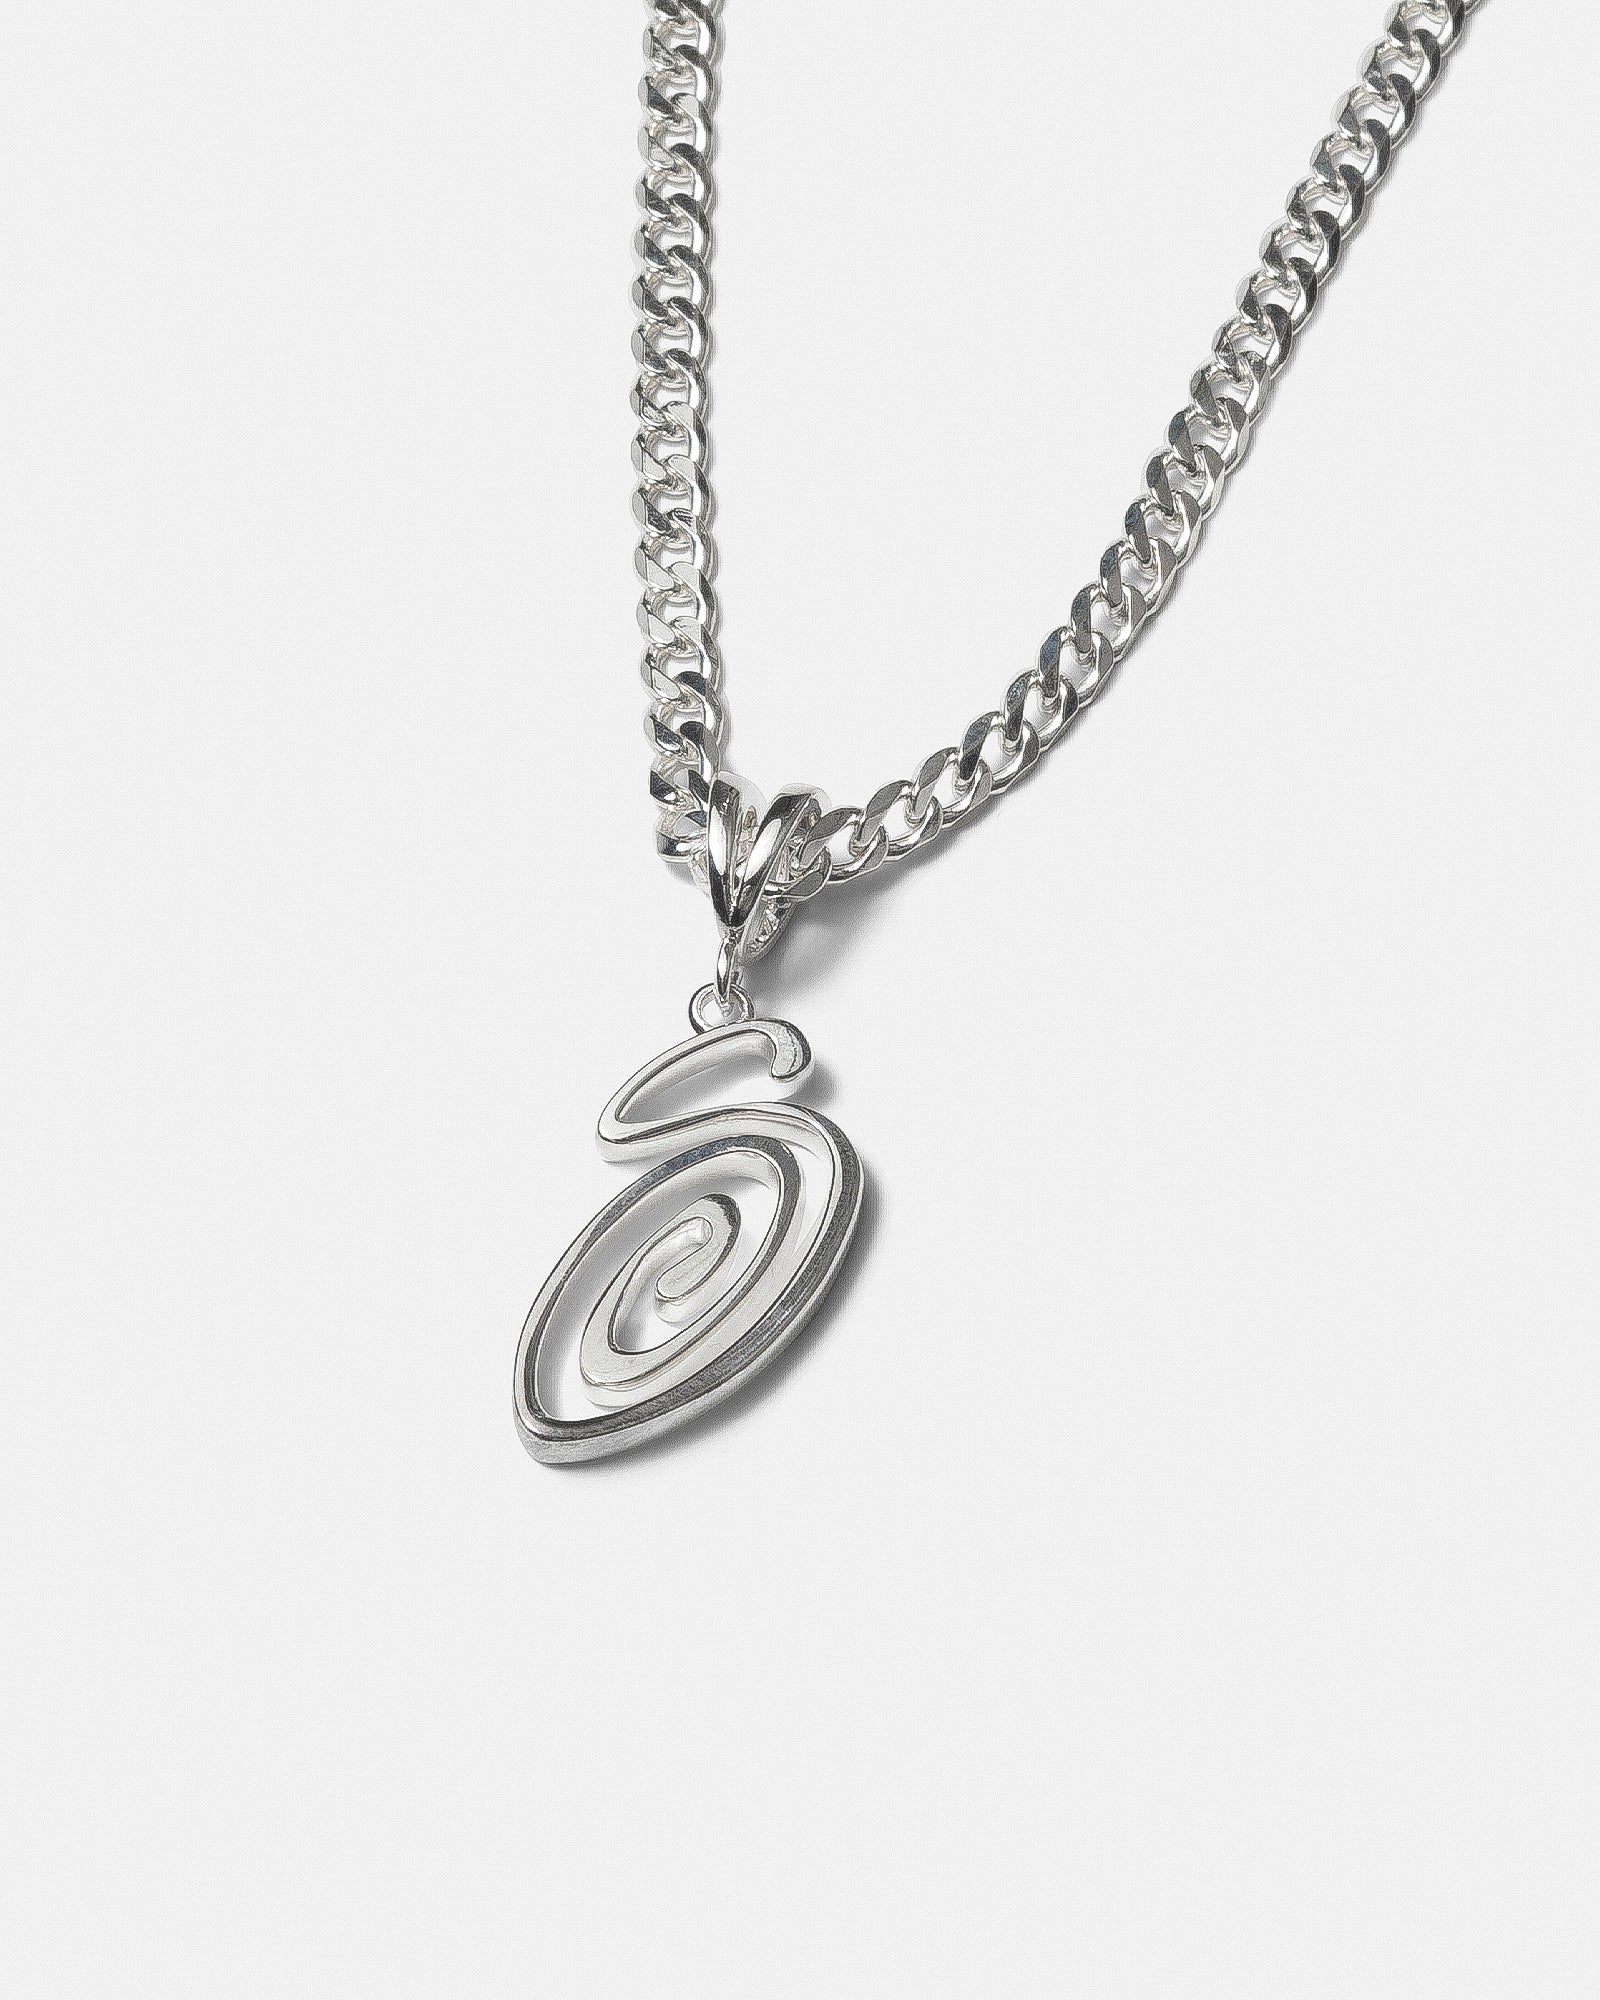 SWIRLY S CHAIN STERLING SILVER